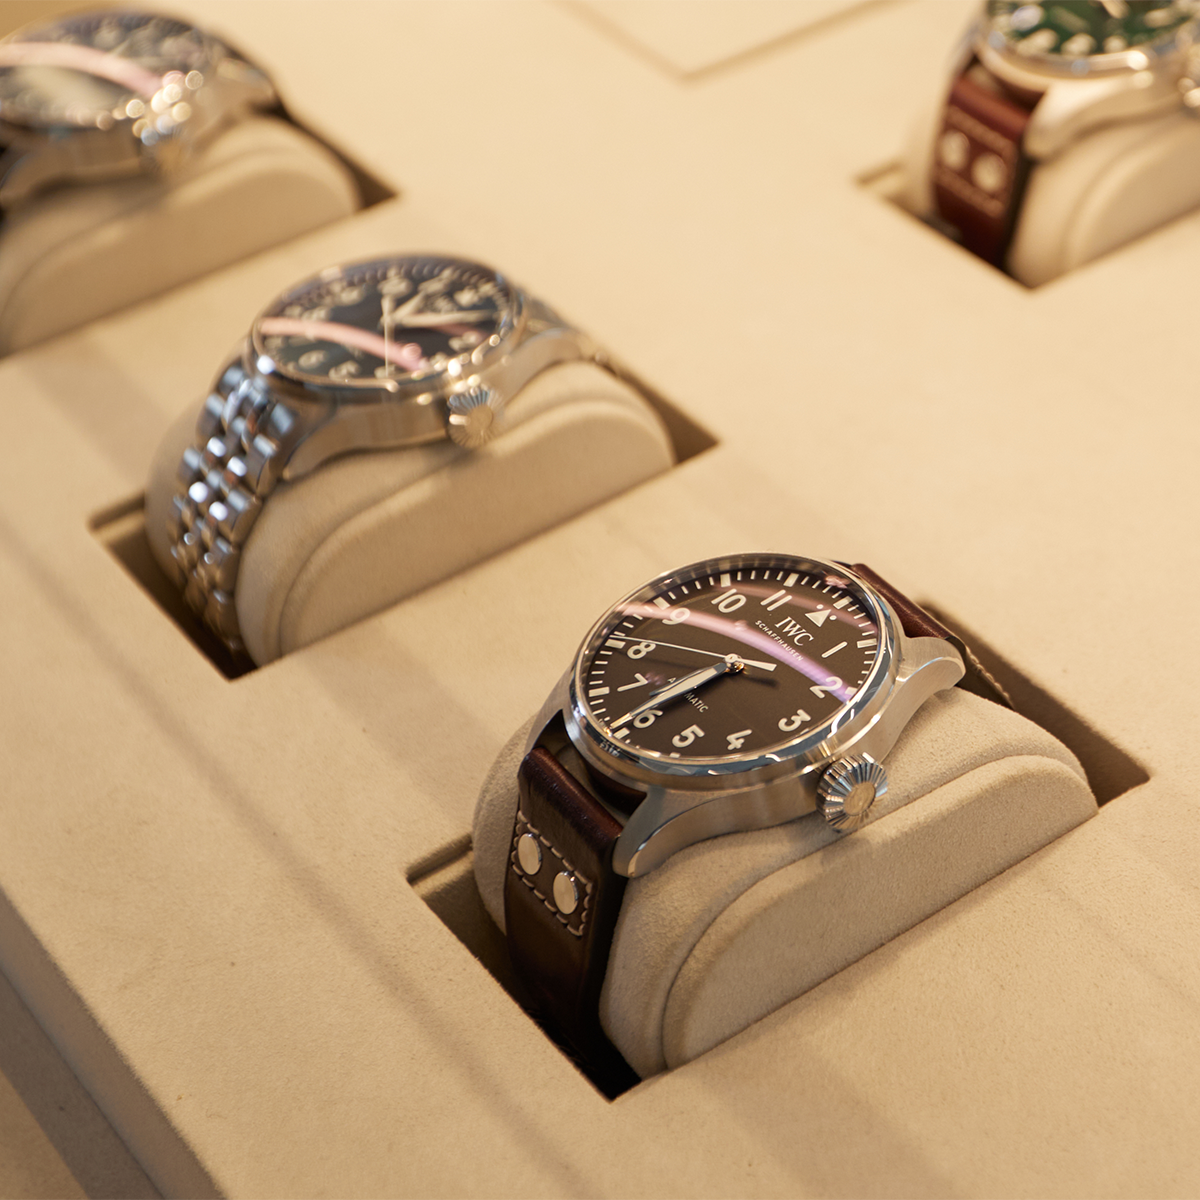 IWC ROADSHOW: The Journey Continues